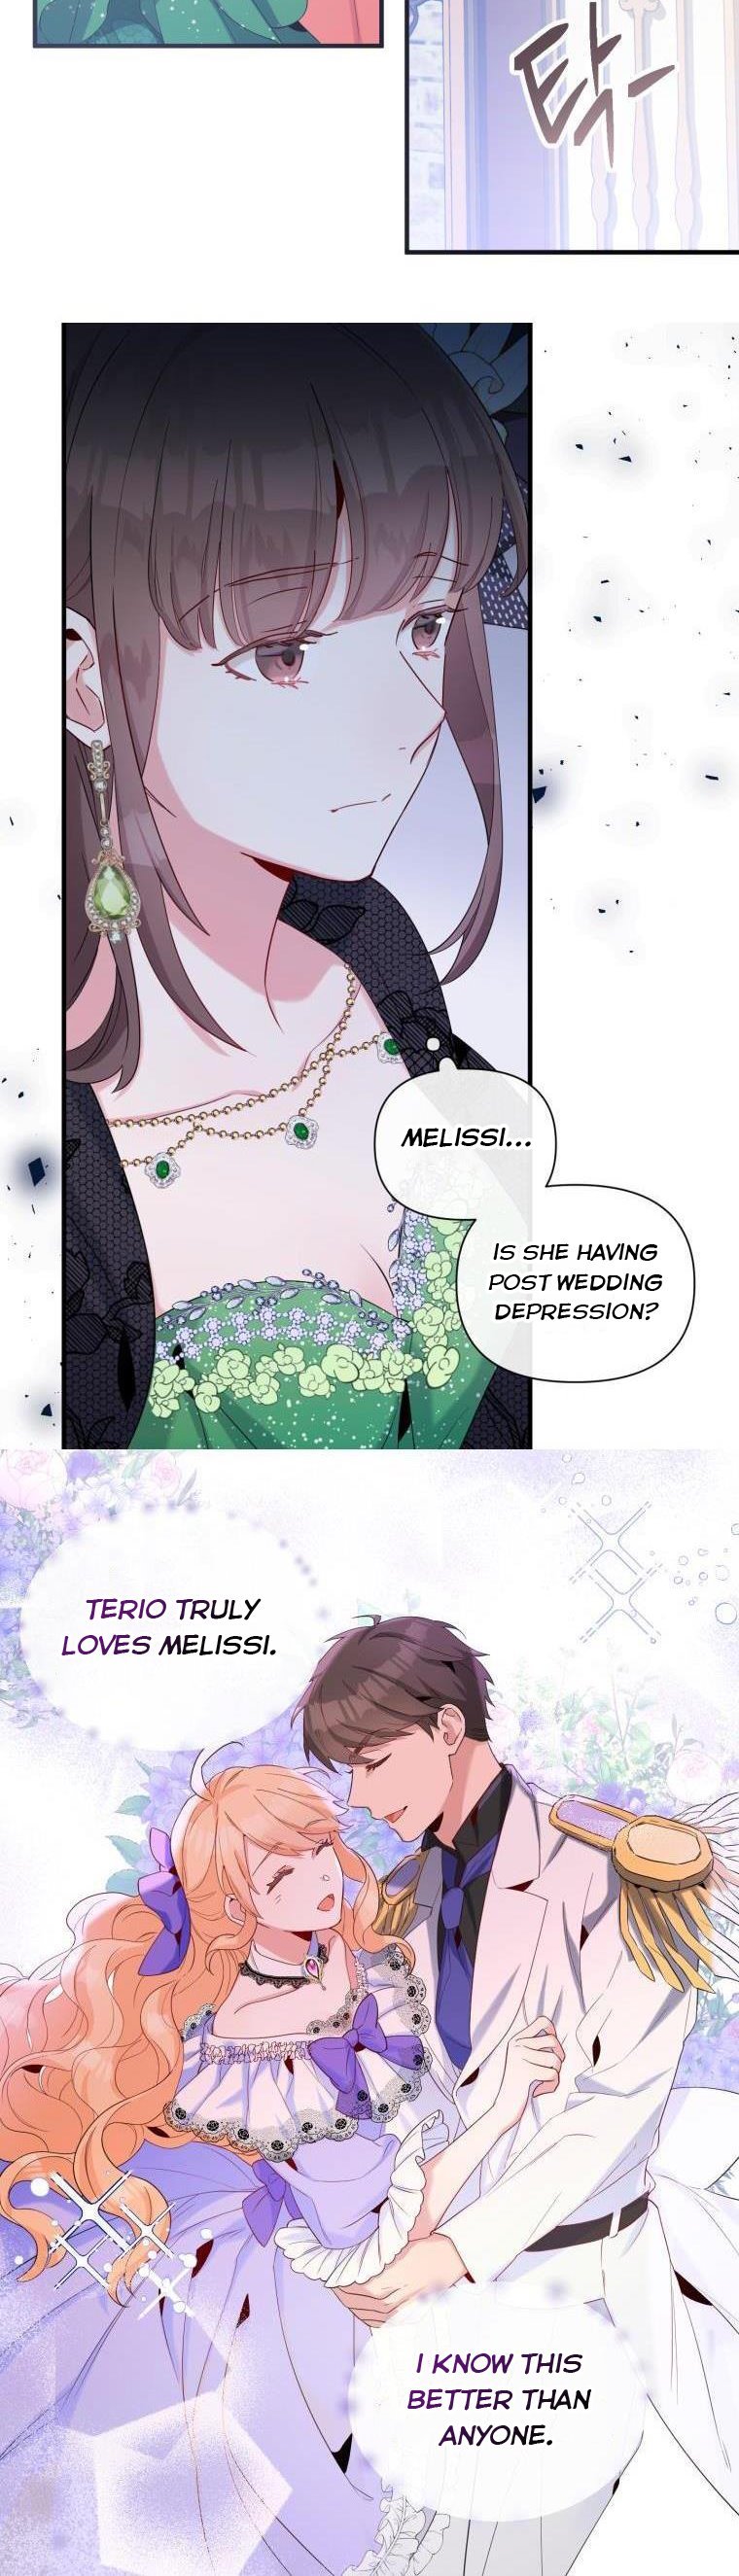 Marriage B chapter 30